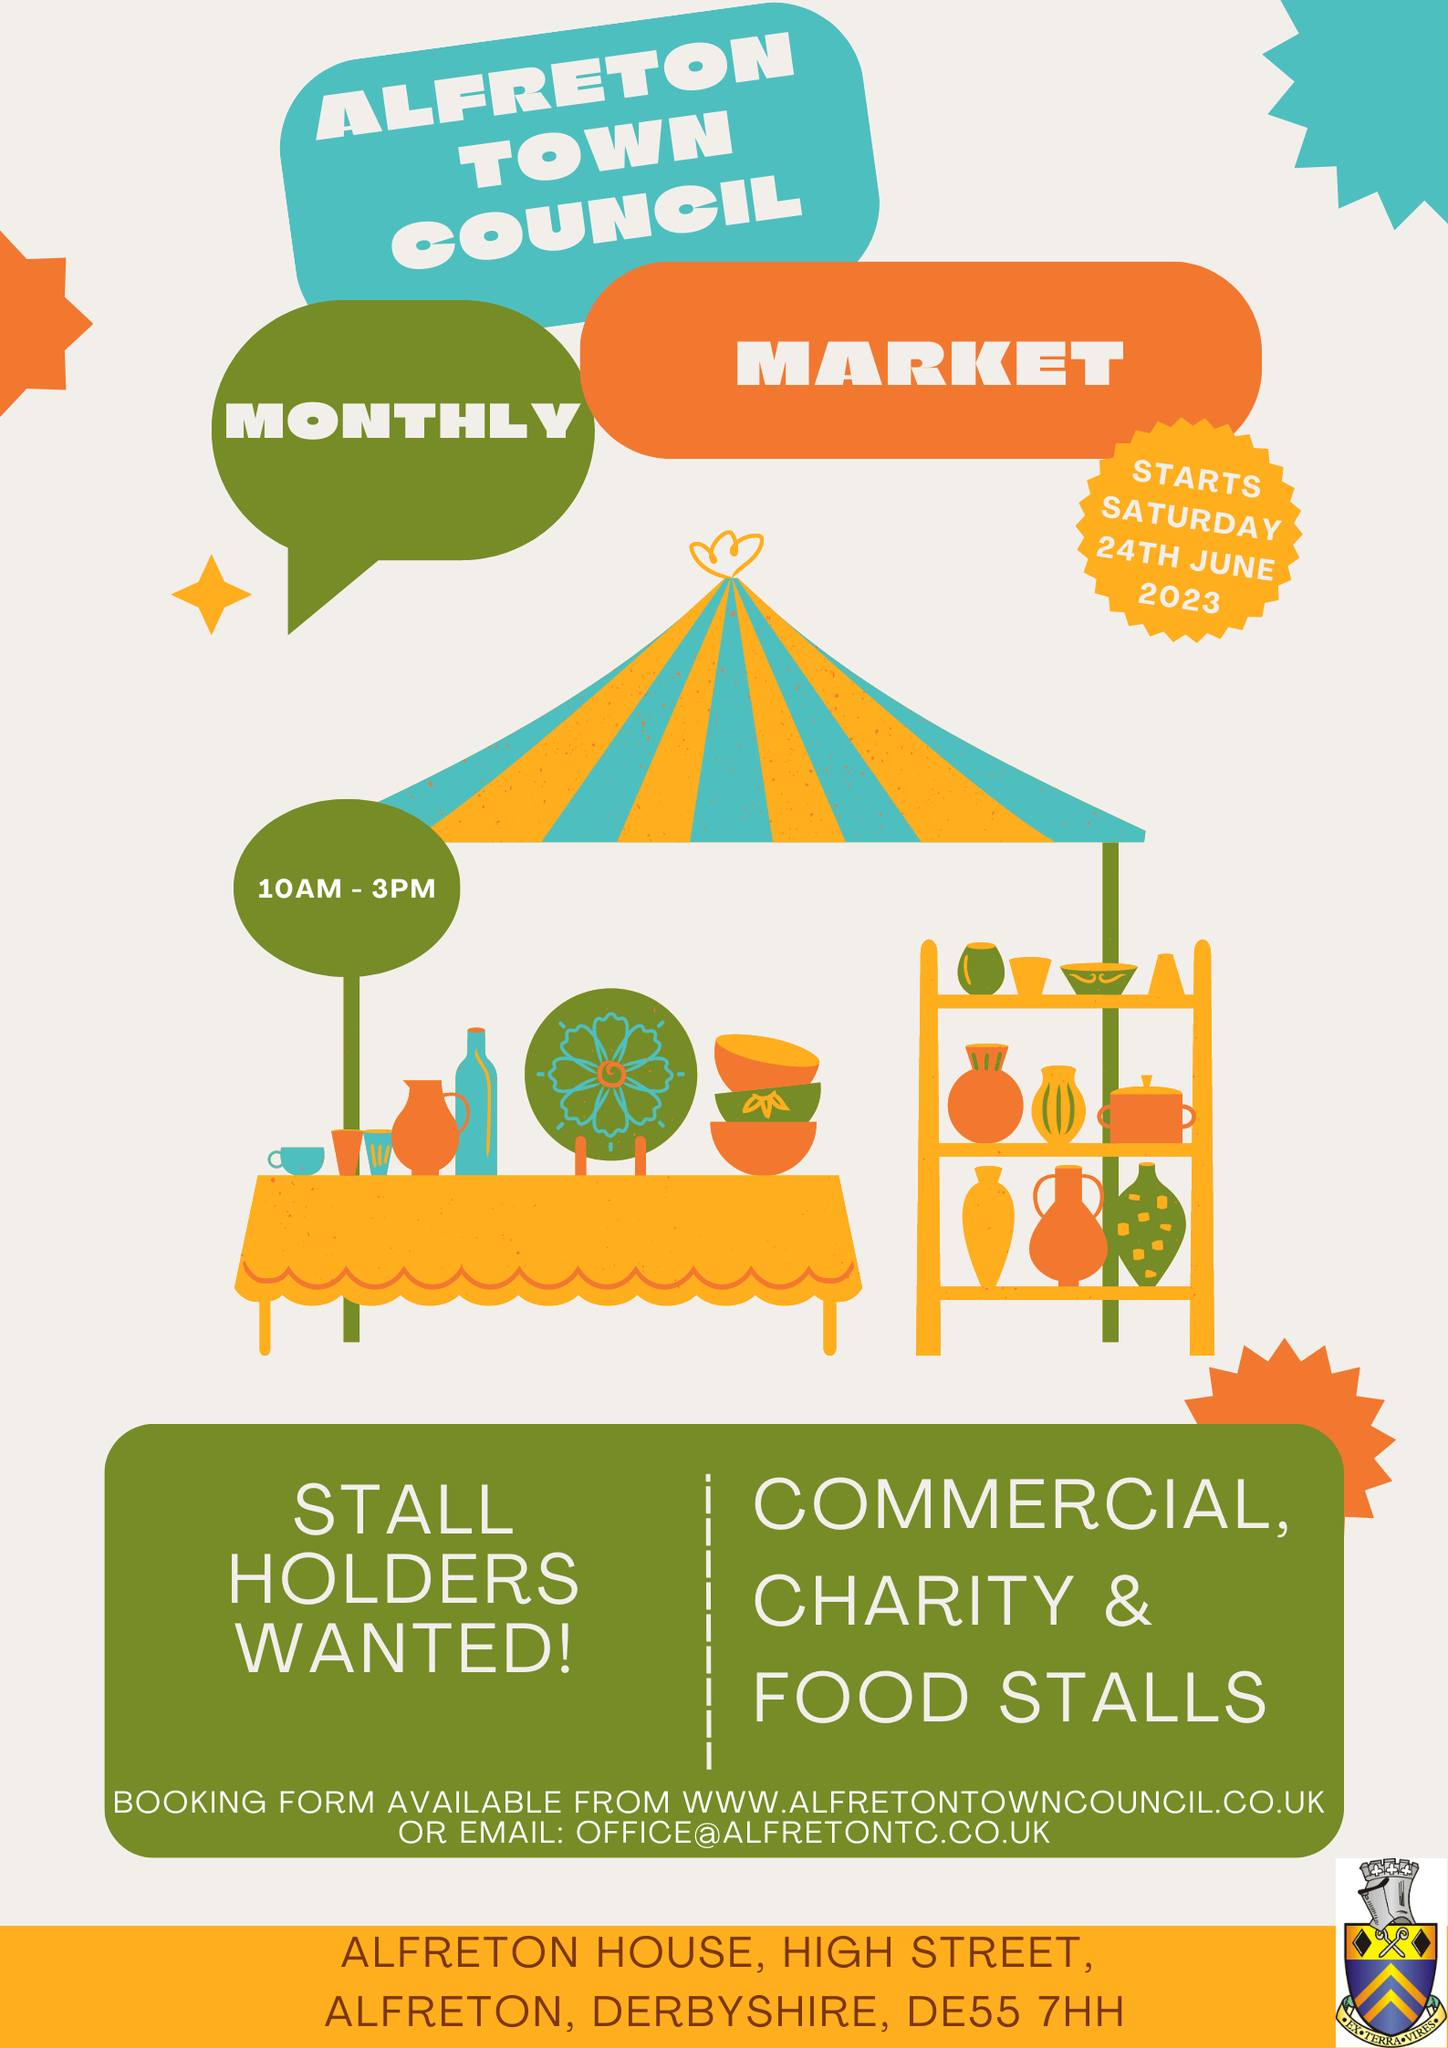 Alfreton Town Council is launching a monthly market to take place at Alfreton House